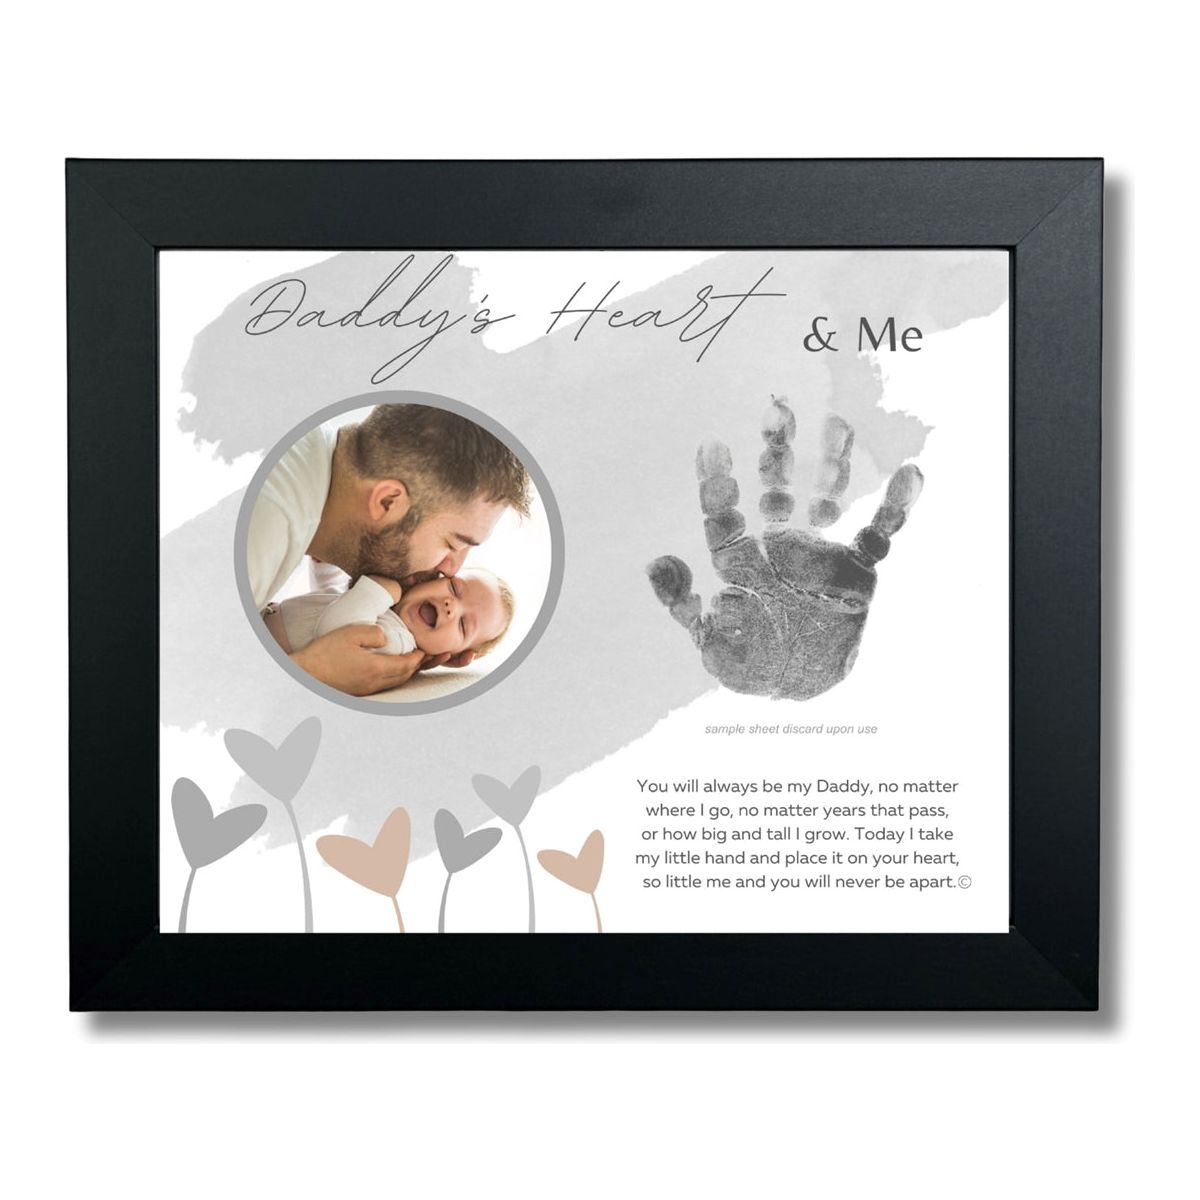 8x10 black frame with &quot;Daddy&#39;s Heart &amp; Me&quot; artwork with poem, space for a handprint, and a circular opening for a photograph.